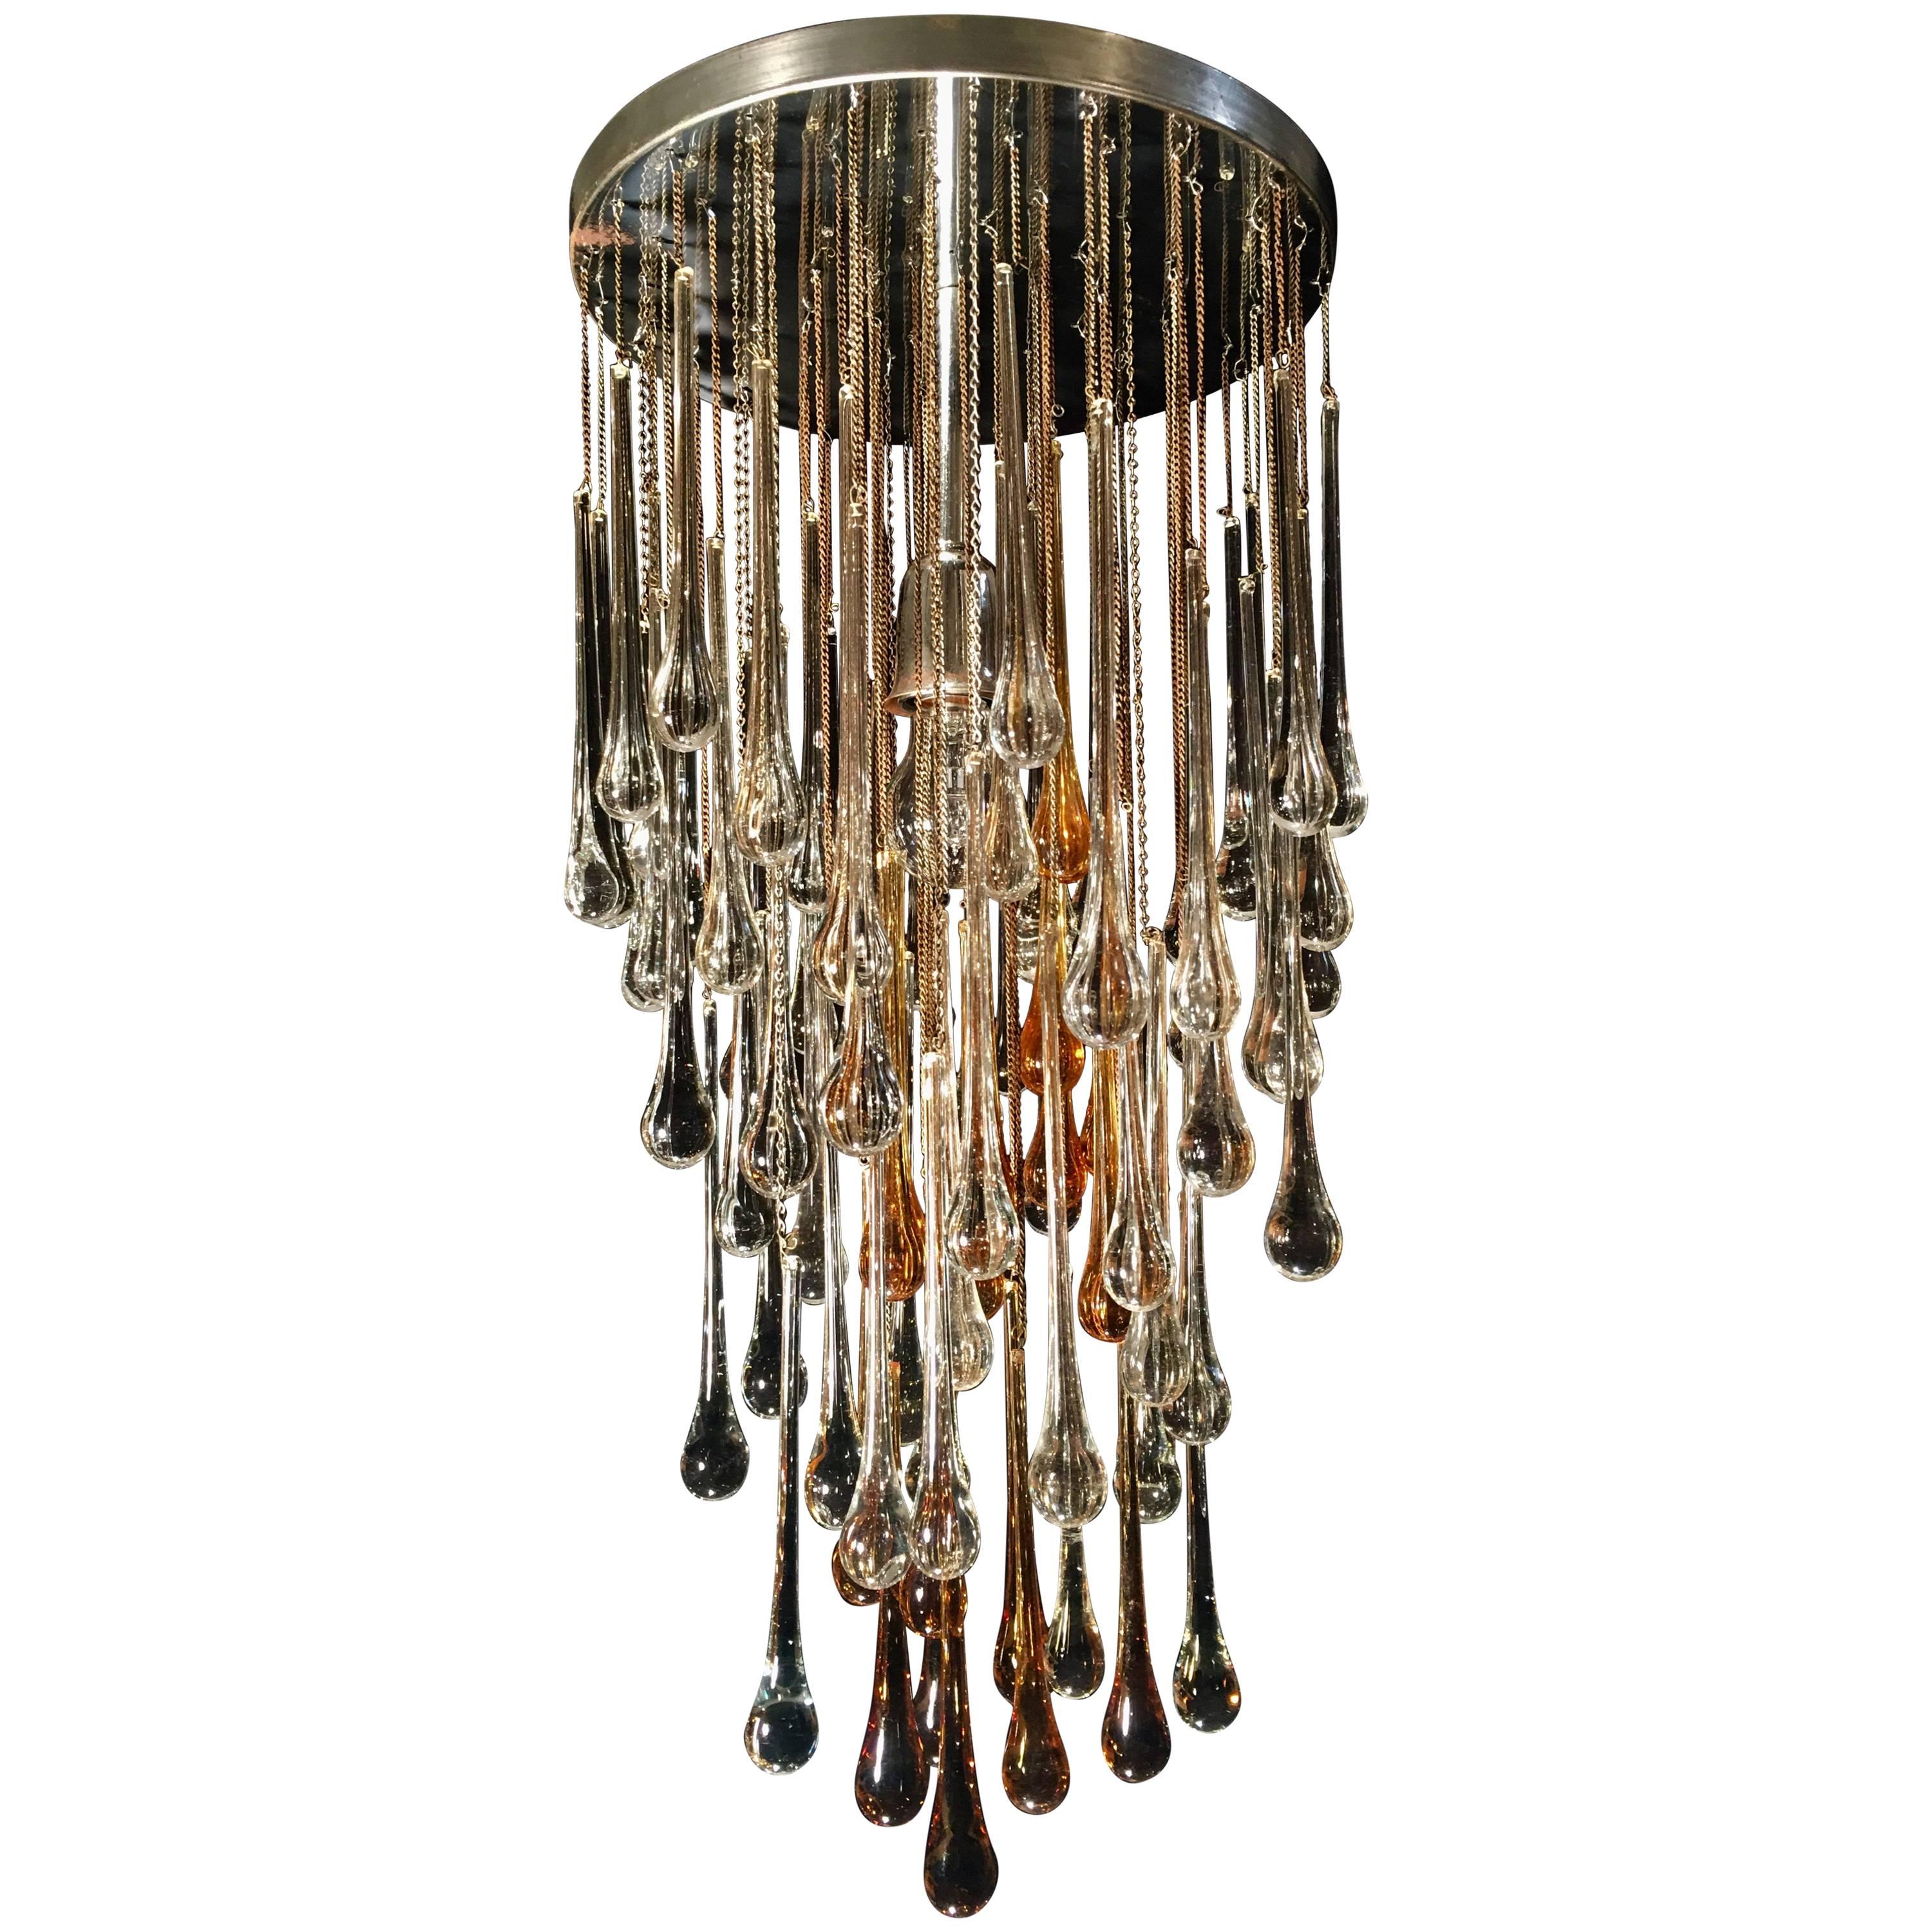 Exceptional Drops Chandelier in the Style of Venini, 1970s